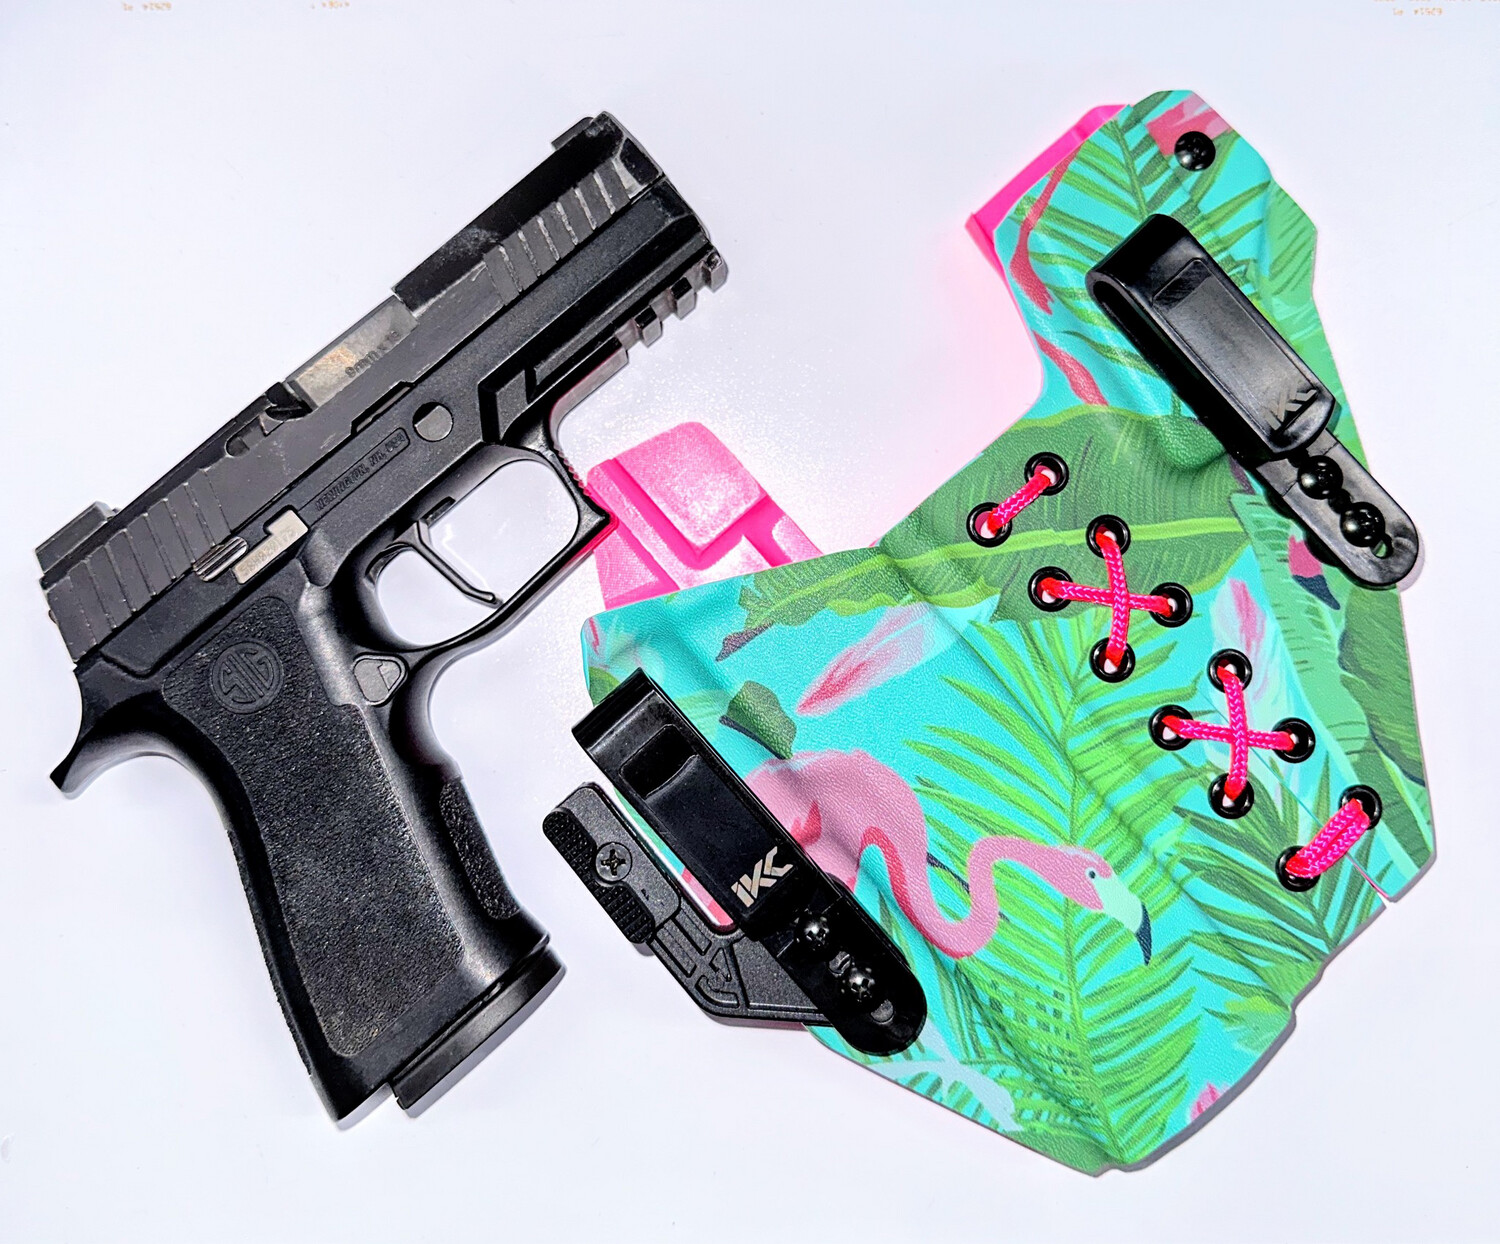 Kydex Manila - LV Supreme Inspired dual custom print IWB holster CUSTOM  Prints by KYDEX MANILA KM holsters just redifined the word Customize..  the FIRST and ONLY Kydex Holster maker in the